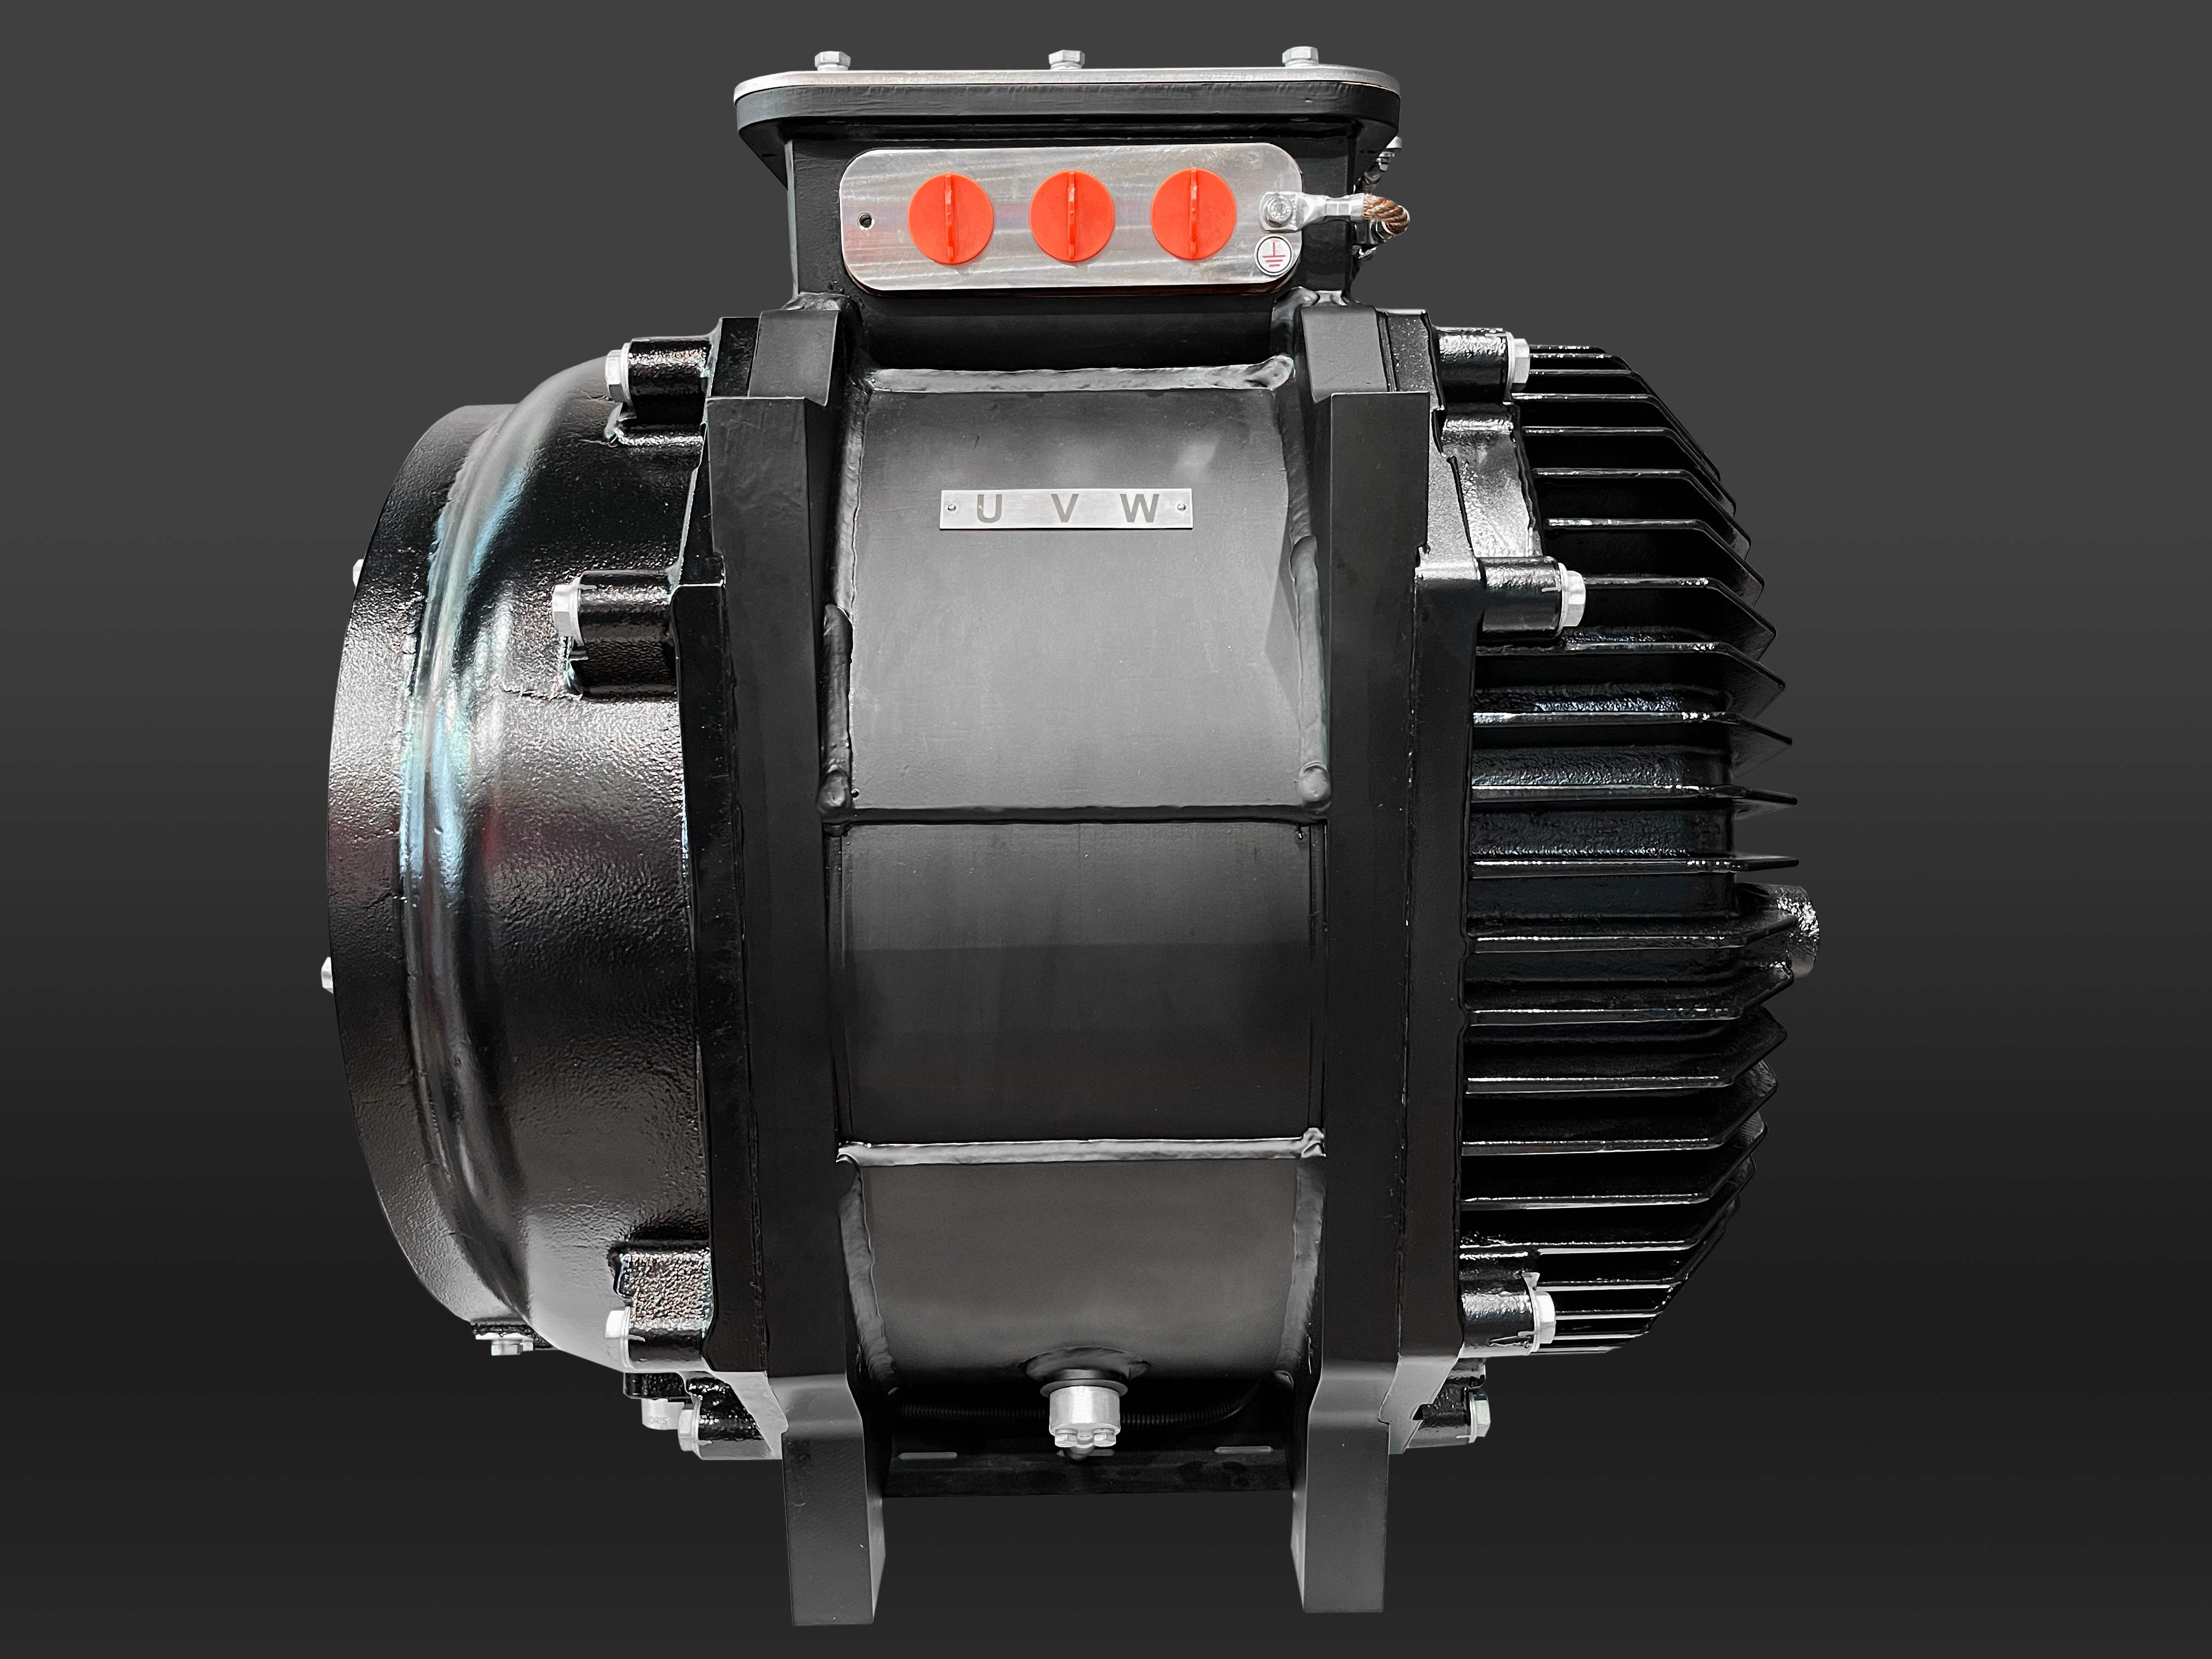 The image shows an electric motor with TA14 temperature sensors mounted on it